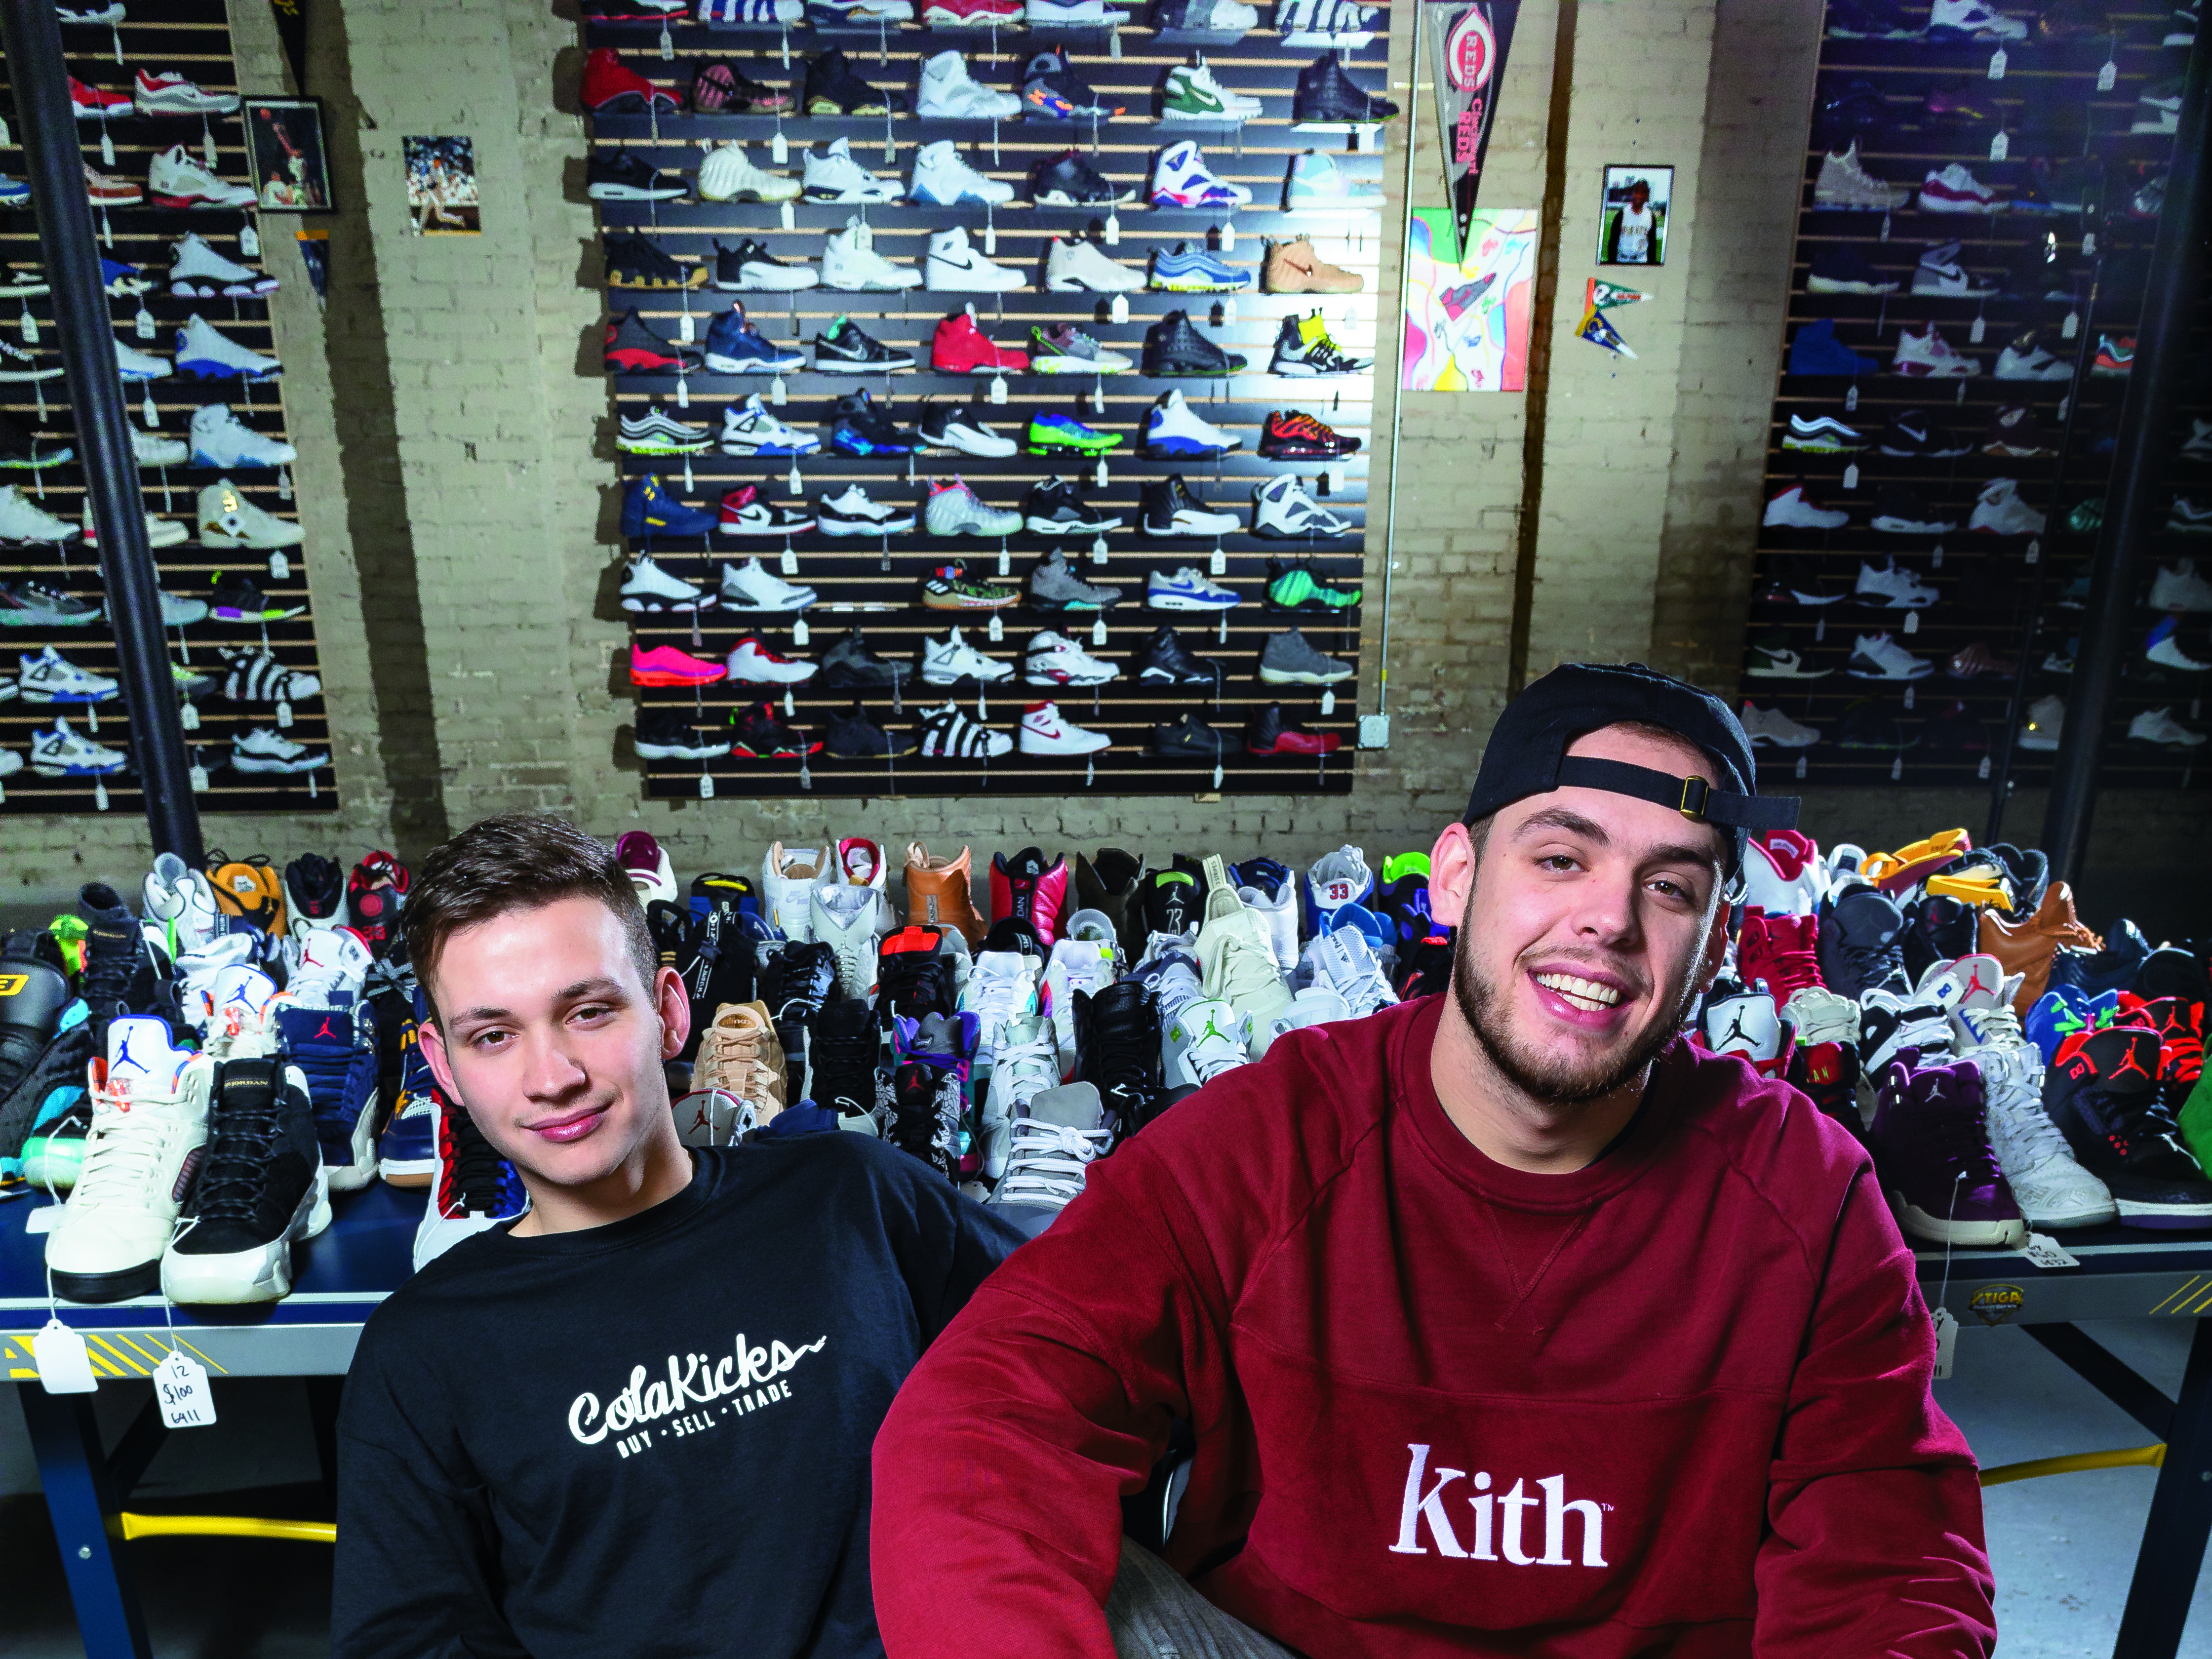 Former USC roommates Josh Kilgore and Adam Patrick relax while telling their story of opening ColaKicks in Five Points. The business model focuses on buying gently used, in-demand sneakers and selling them for a fraction of the original cost. 